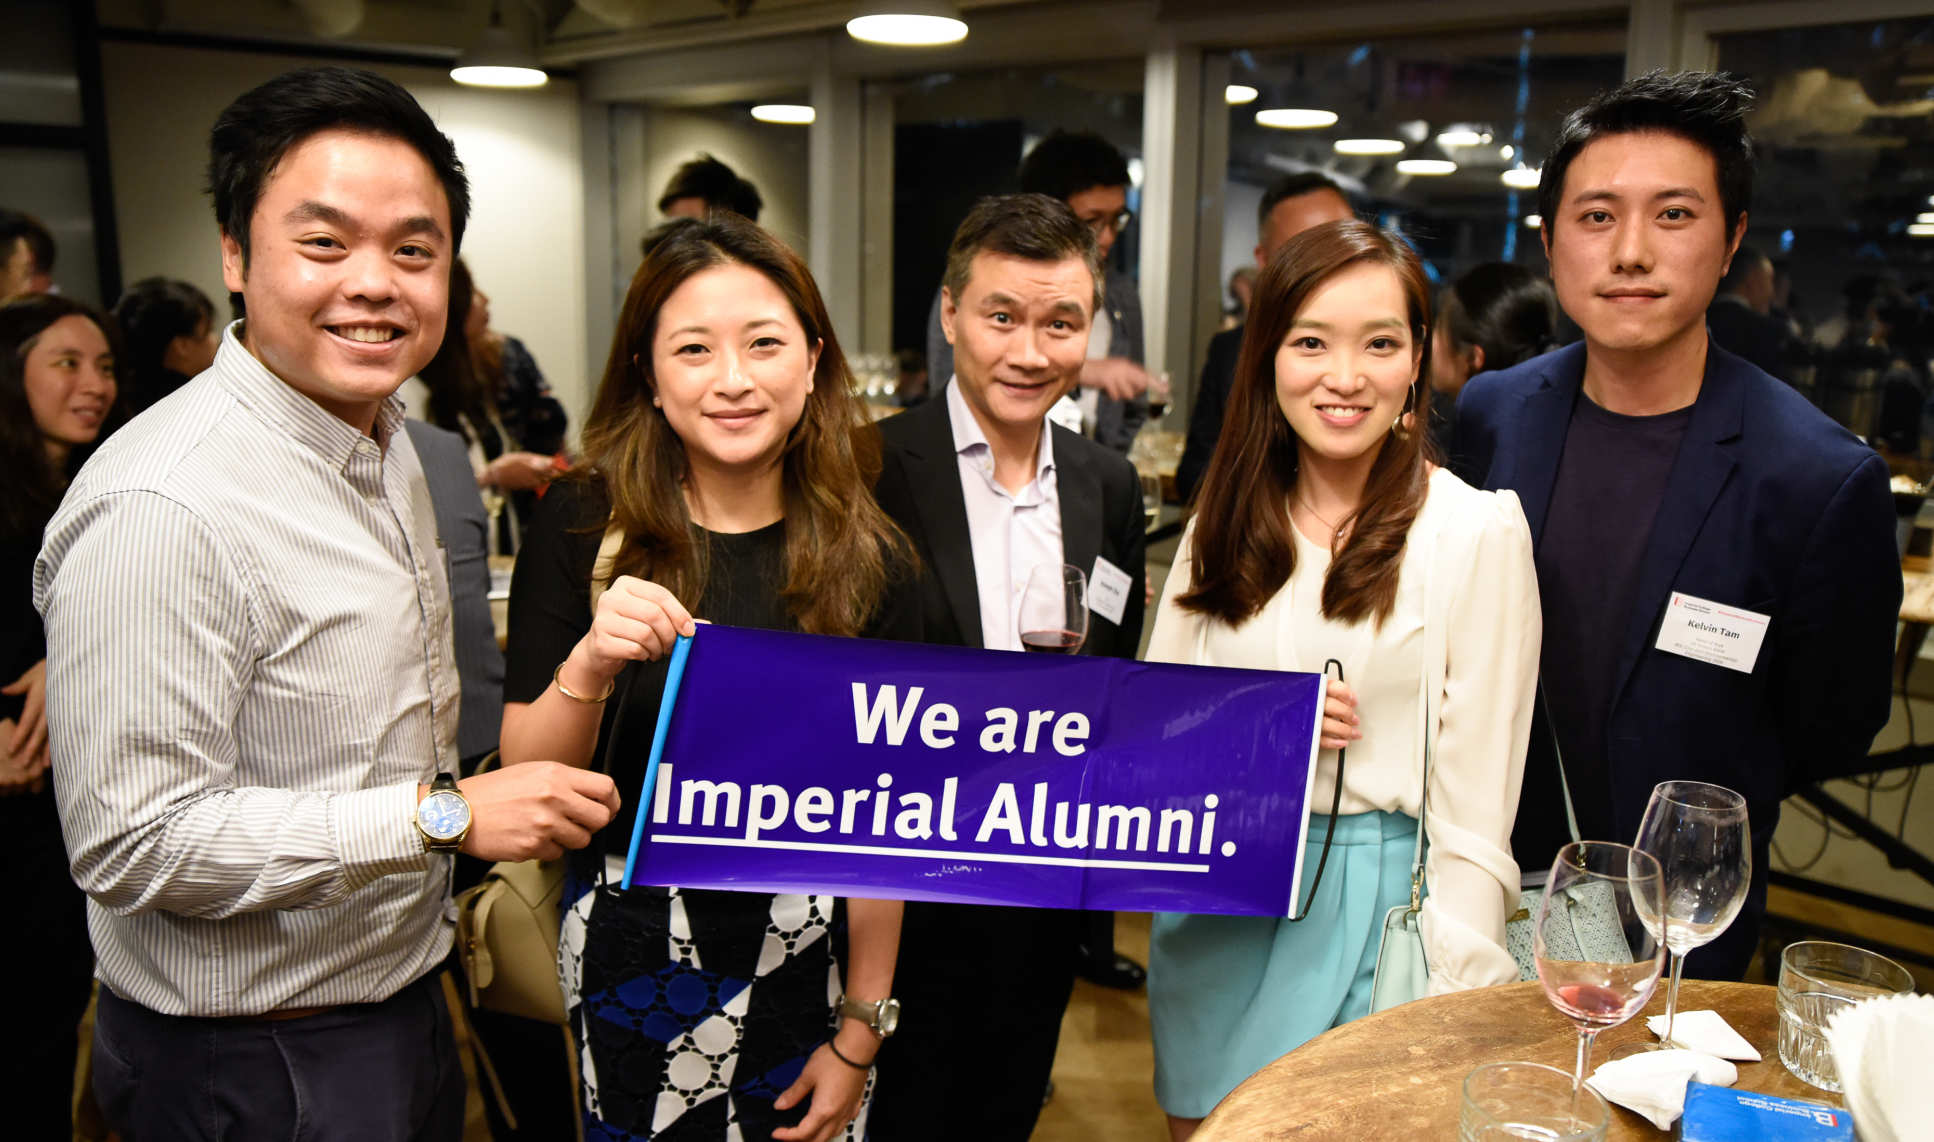 More than 80 alumni attended the event in Hong Kong